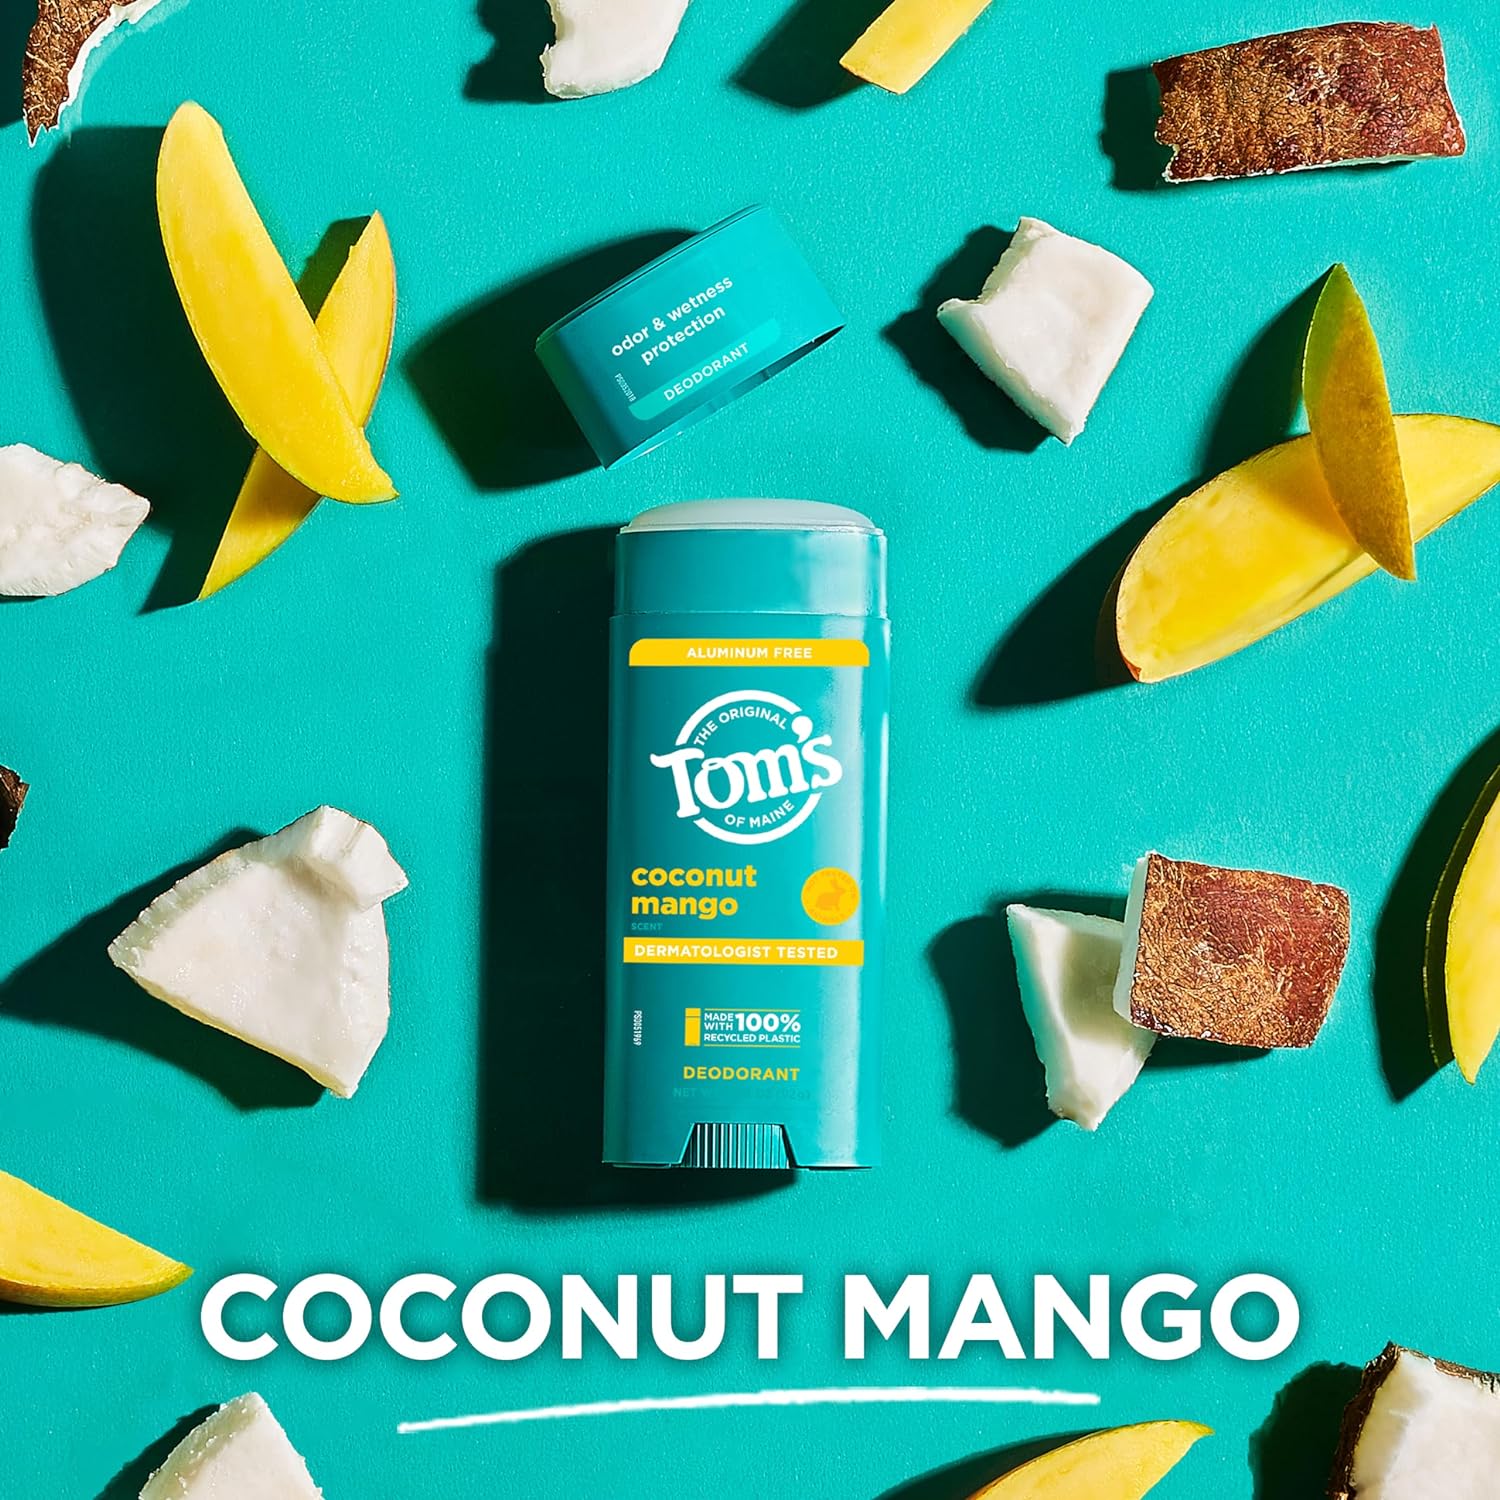 Tom’s of Maine Coconut Mango Natural Deodorant for Women and Men, Aluminum Free, 3.25 oz : Beauty & Personal Care